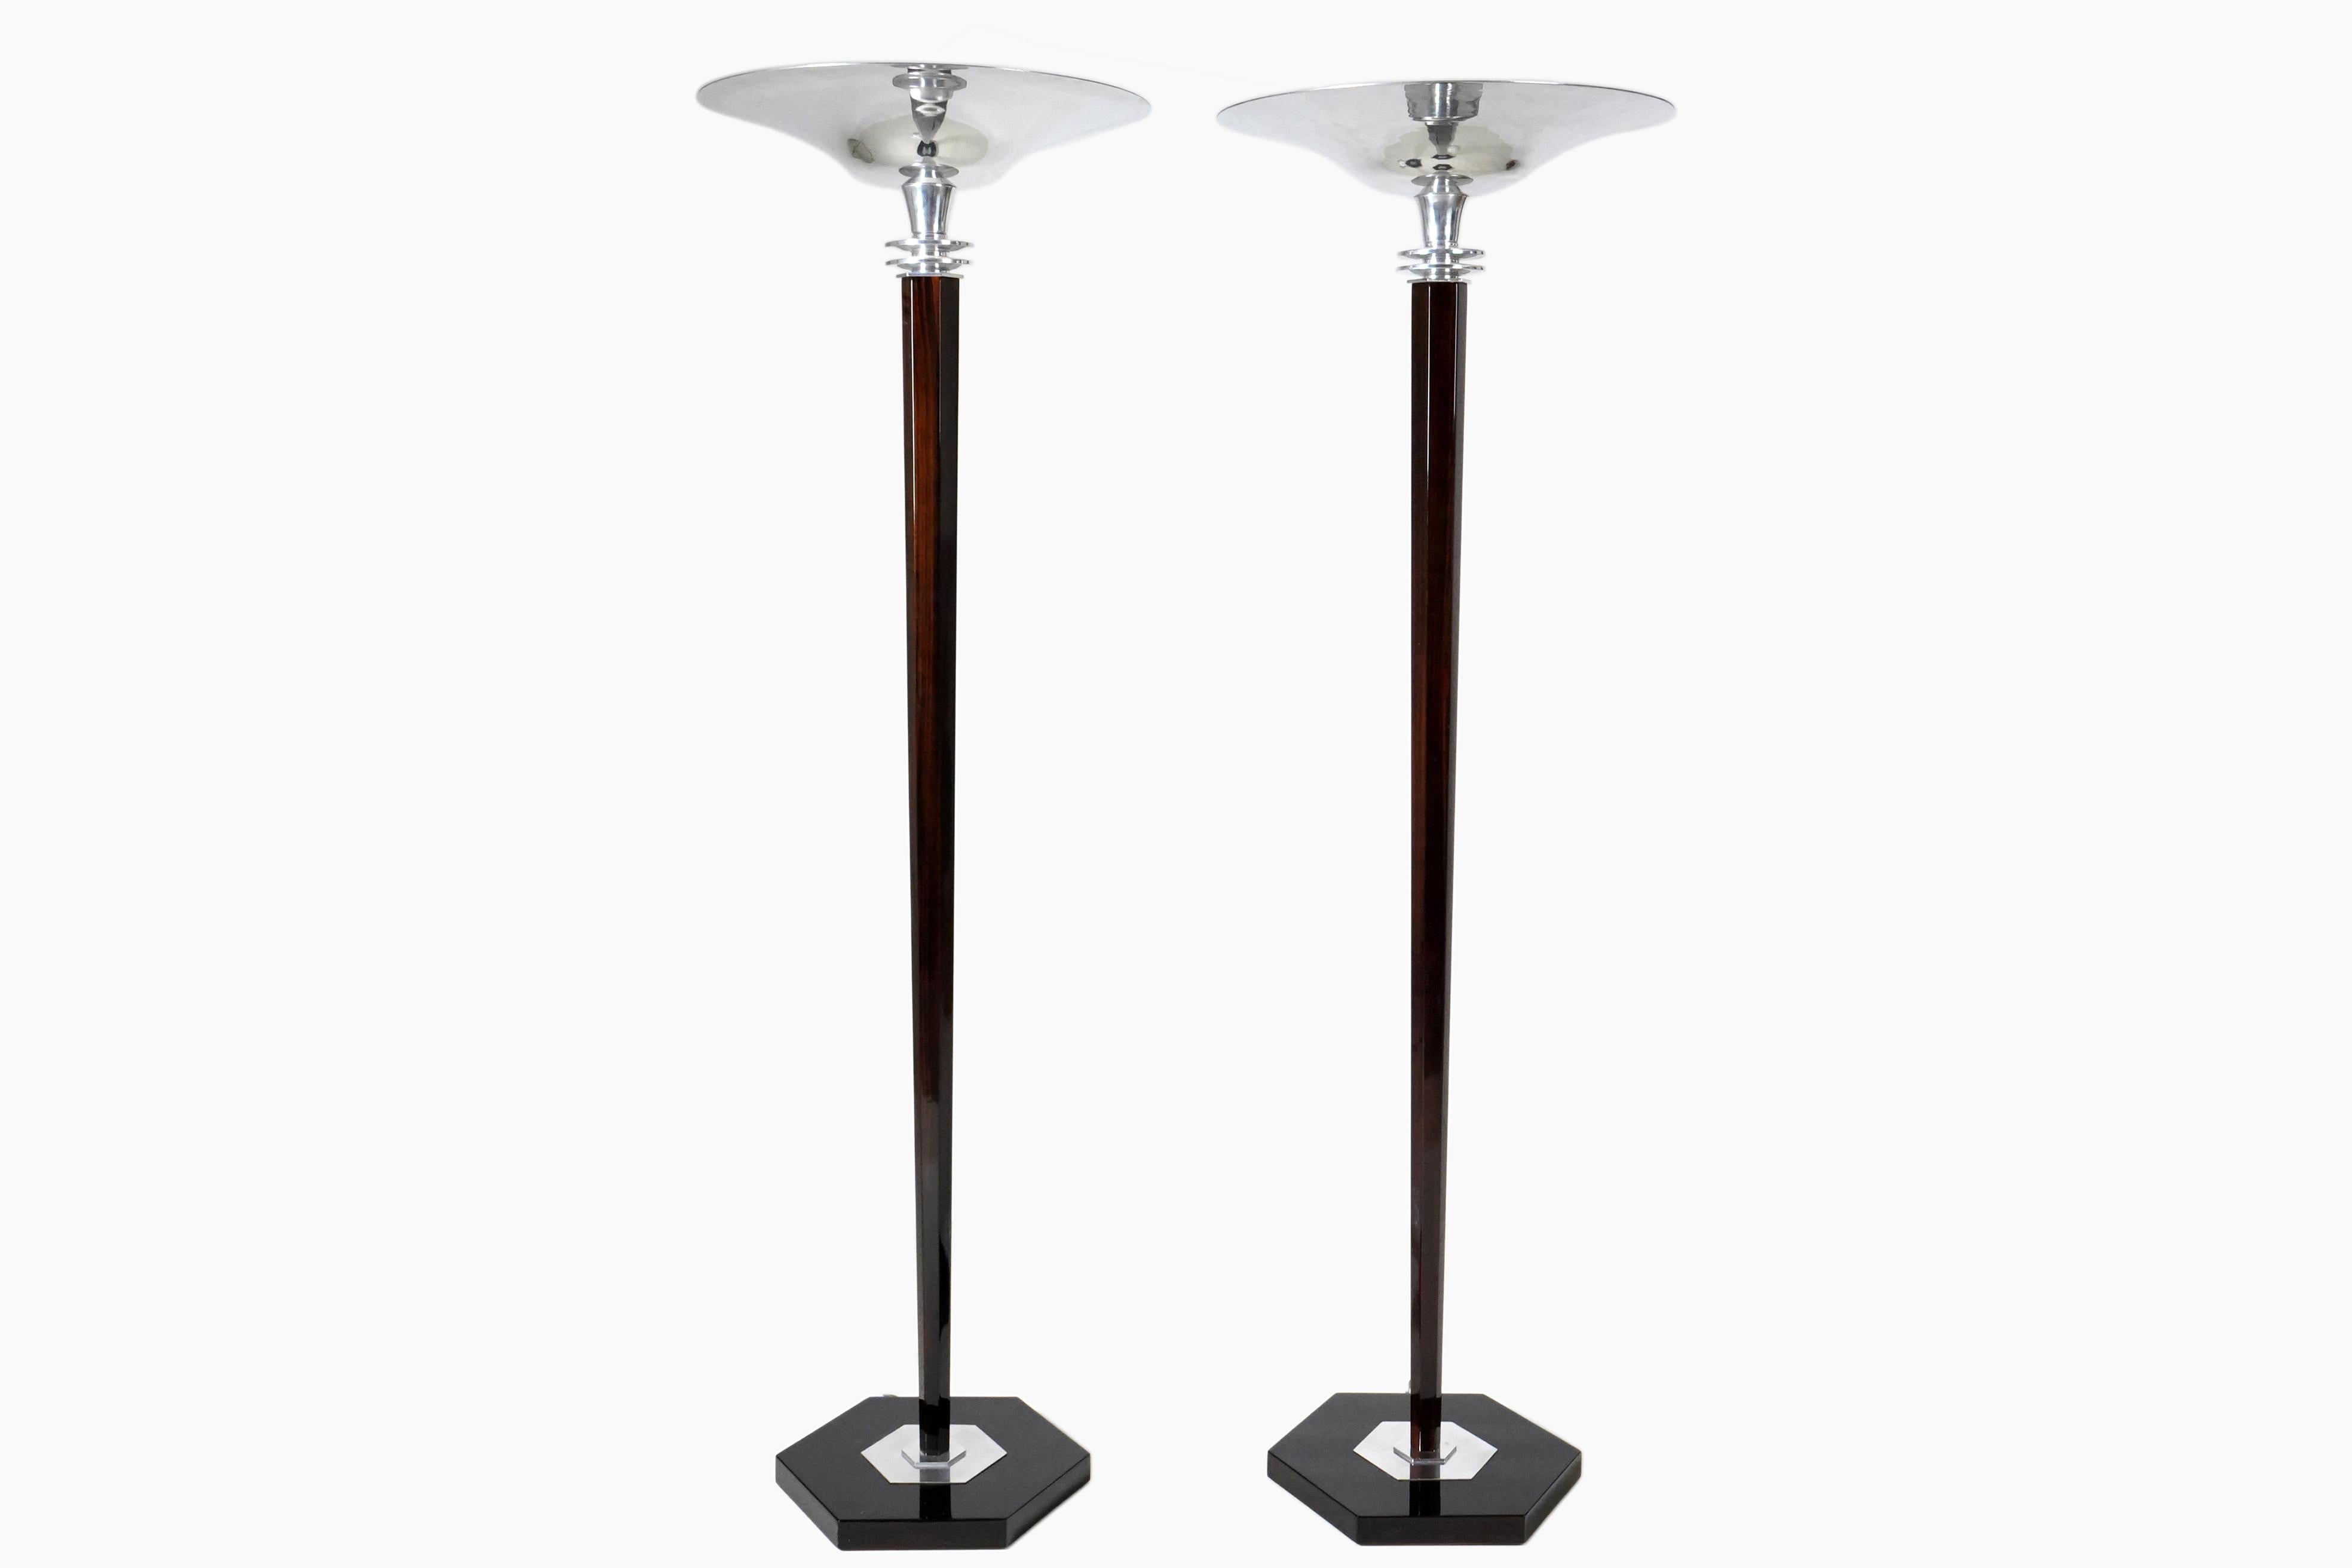 These dramatic torchieres were made in Budapest, Hungary according to authentic 1930s original designs. The shaft and base are poplar wood, covered in walnut veneer. The upward-flaring shade and other fittings are nickel-plated aluminum. During the